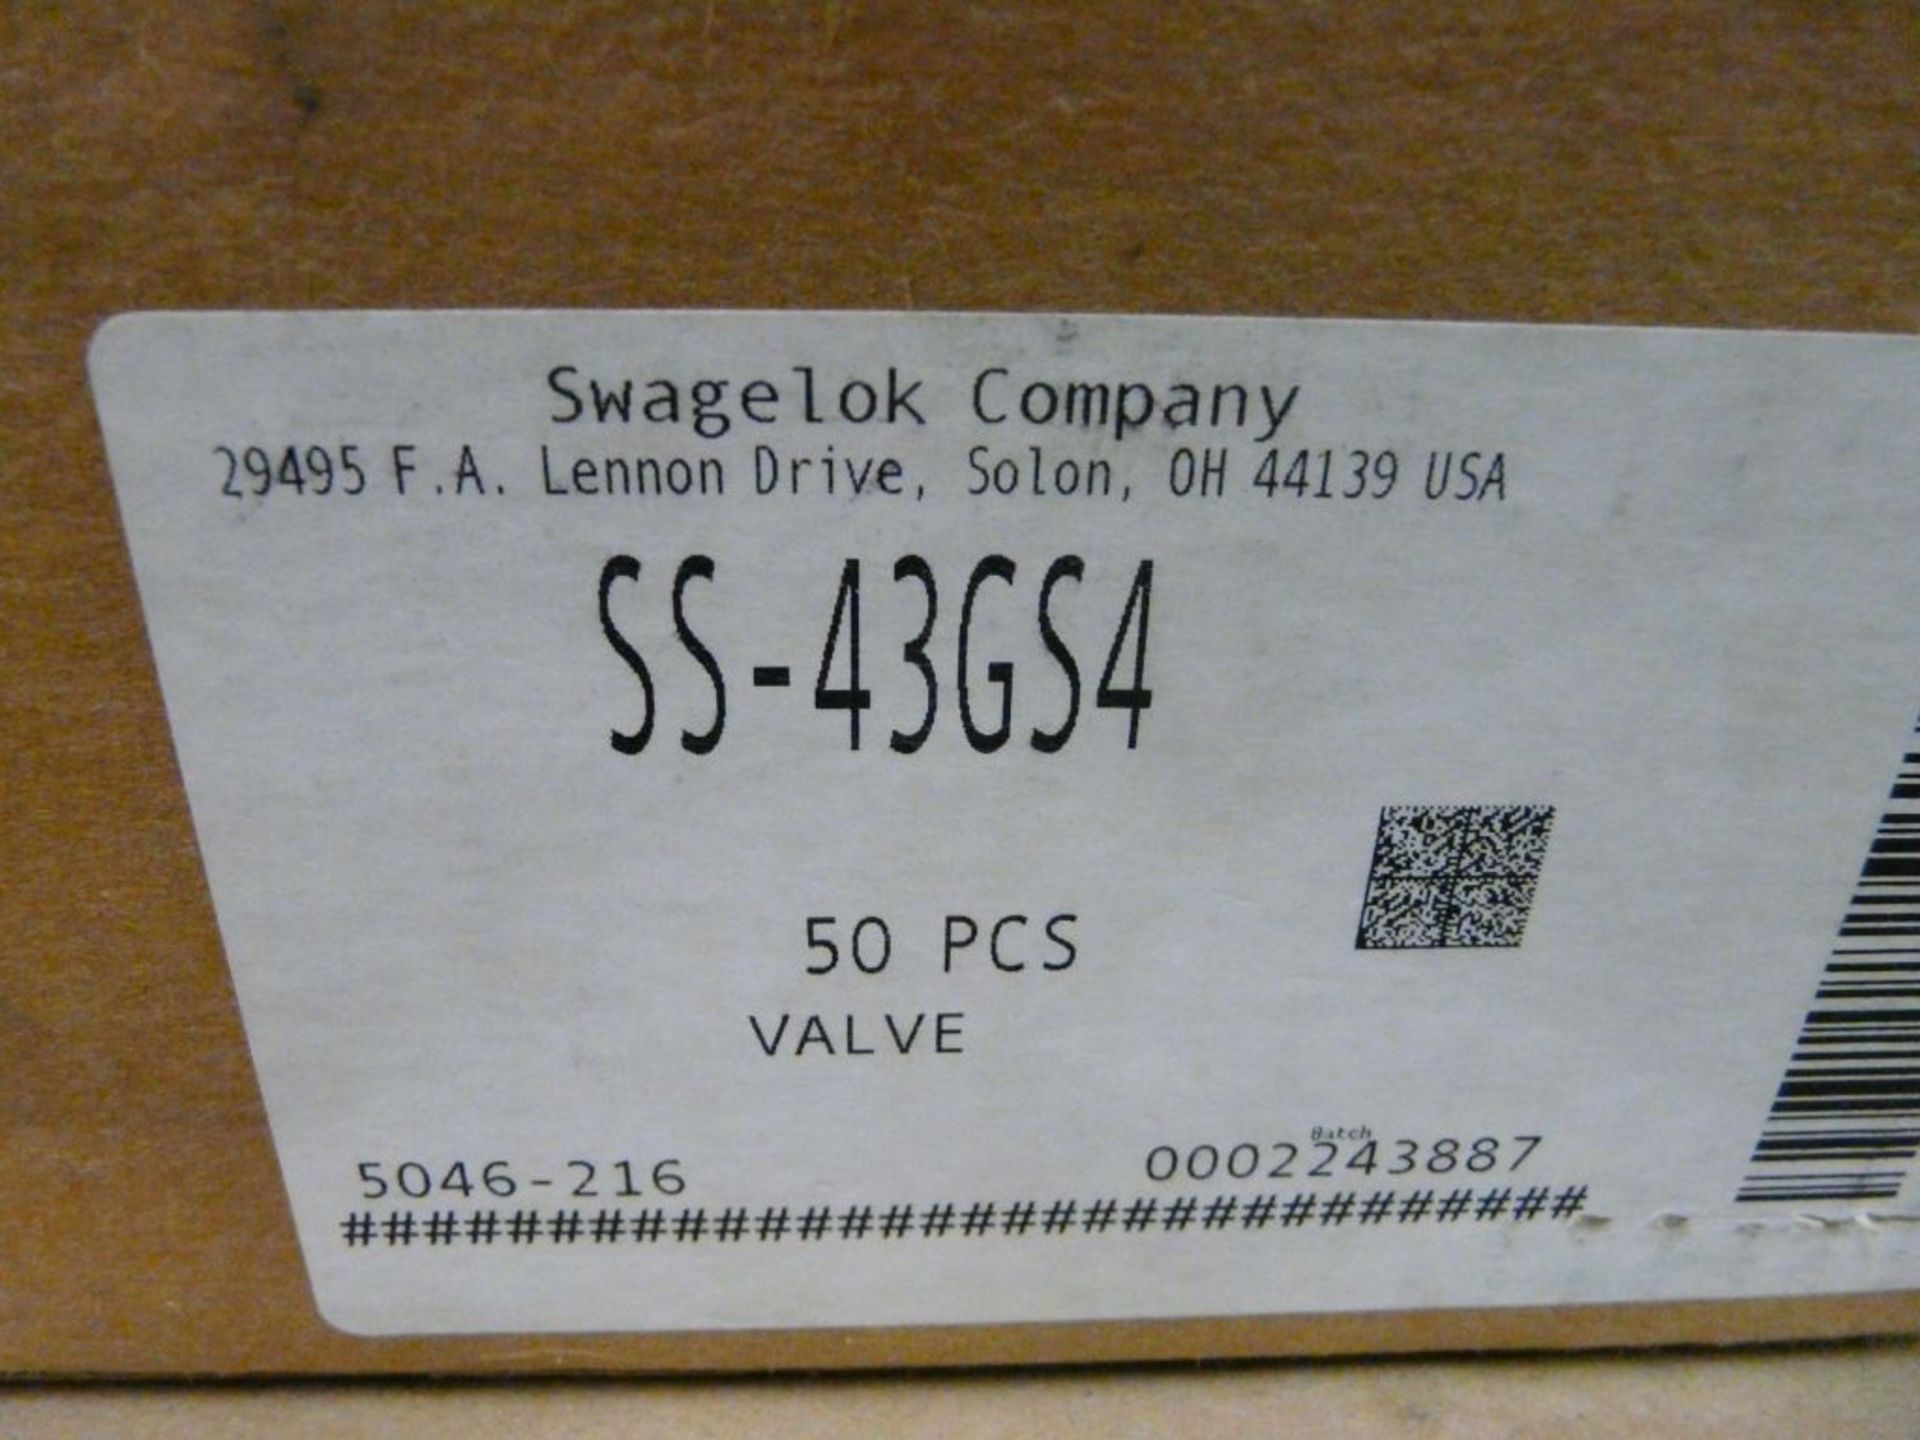 Lot of (50) Swagelok Valves|Part No. SS-43GS4 - Image 2 of 4